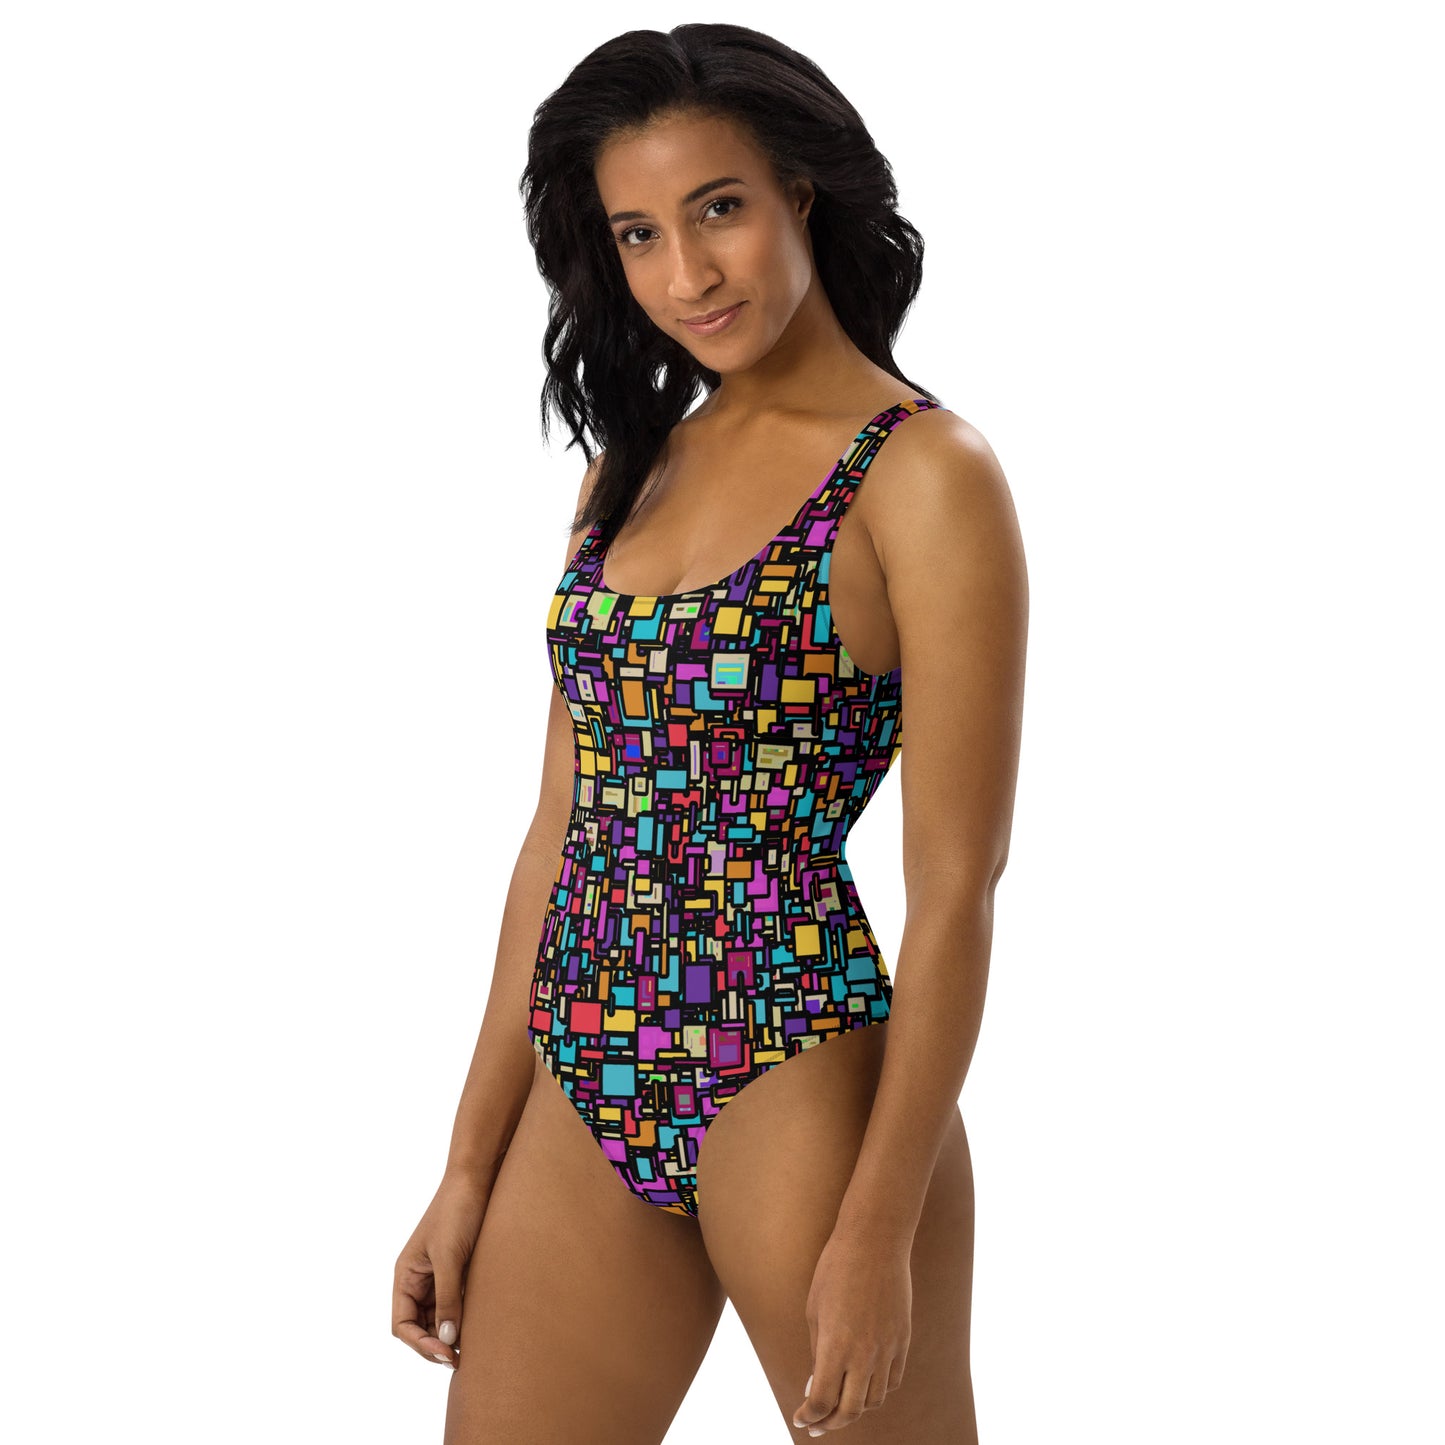 Step Up Your Swimwear Game with Our Bold and Playful Patterned Swimsuit